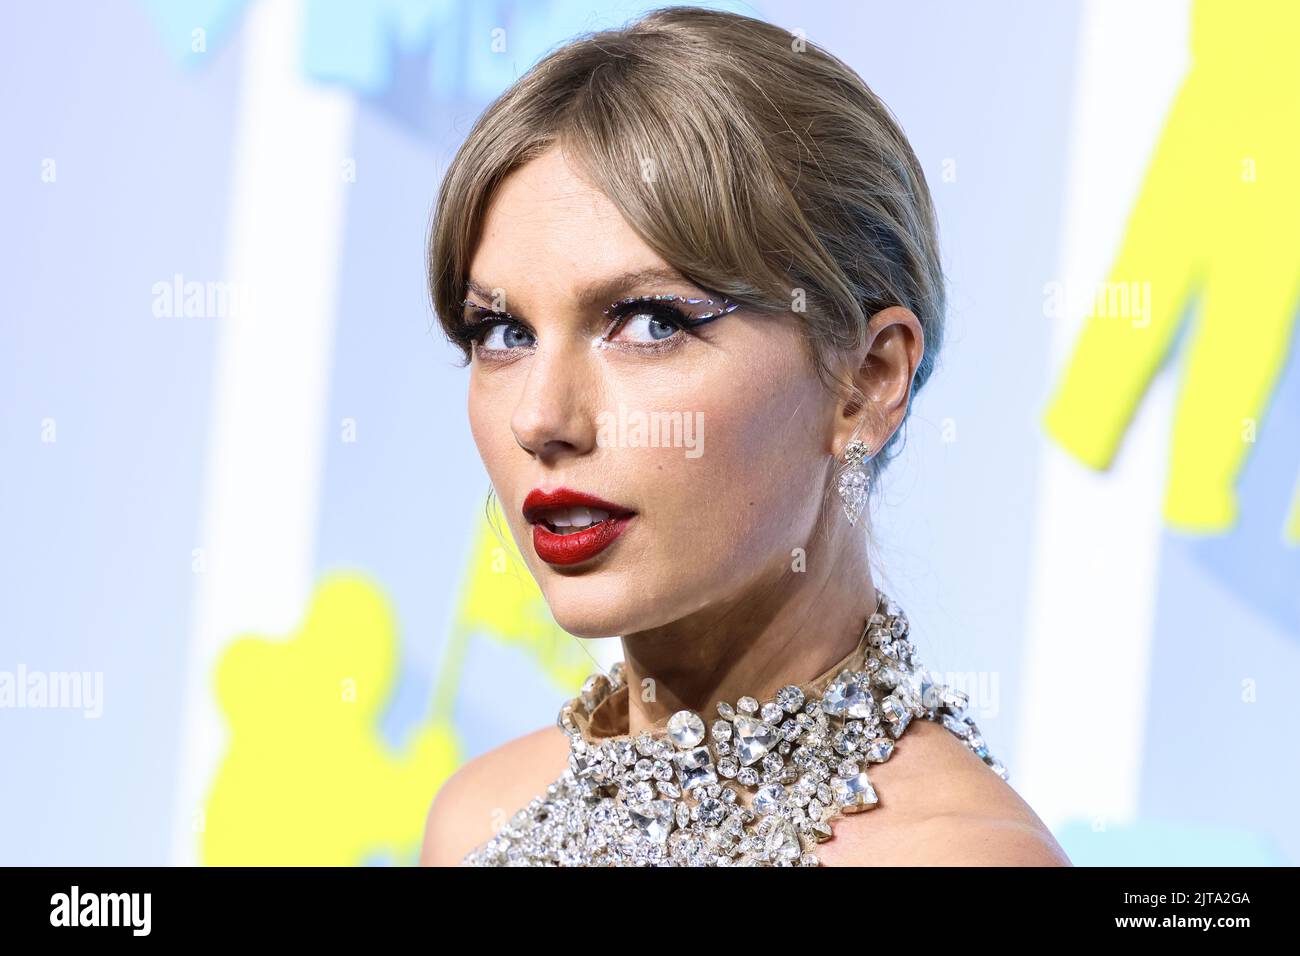 Newark, USA. 28th Aug, 2022. NEWARK, NEW JERSEY, USA - AUGUST 28: Taylor Swift wearing an Oscar de la Renta dress, Christian Louboutin shoes, and Lorraine Schwartz jewelry arrives at the 2022 MTV Video Music Awards held at the Prudential Center on August 28, 2022 in Newark, New Jersey, USA. (Photo by Xavier Collin/Image Press Agency) Credit: Image Press Agency/Alamy Live News Stock Photo